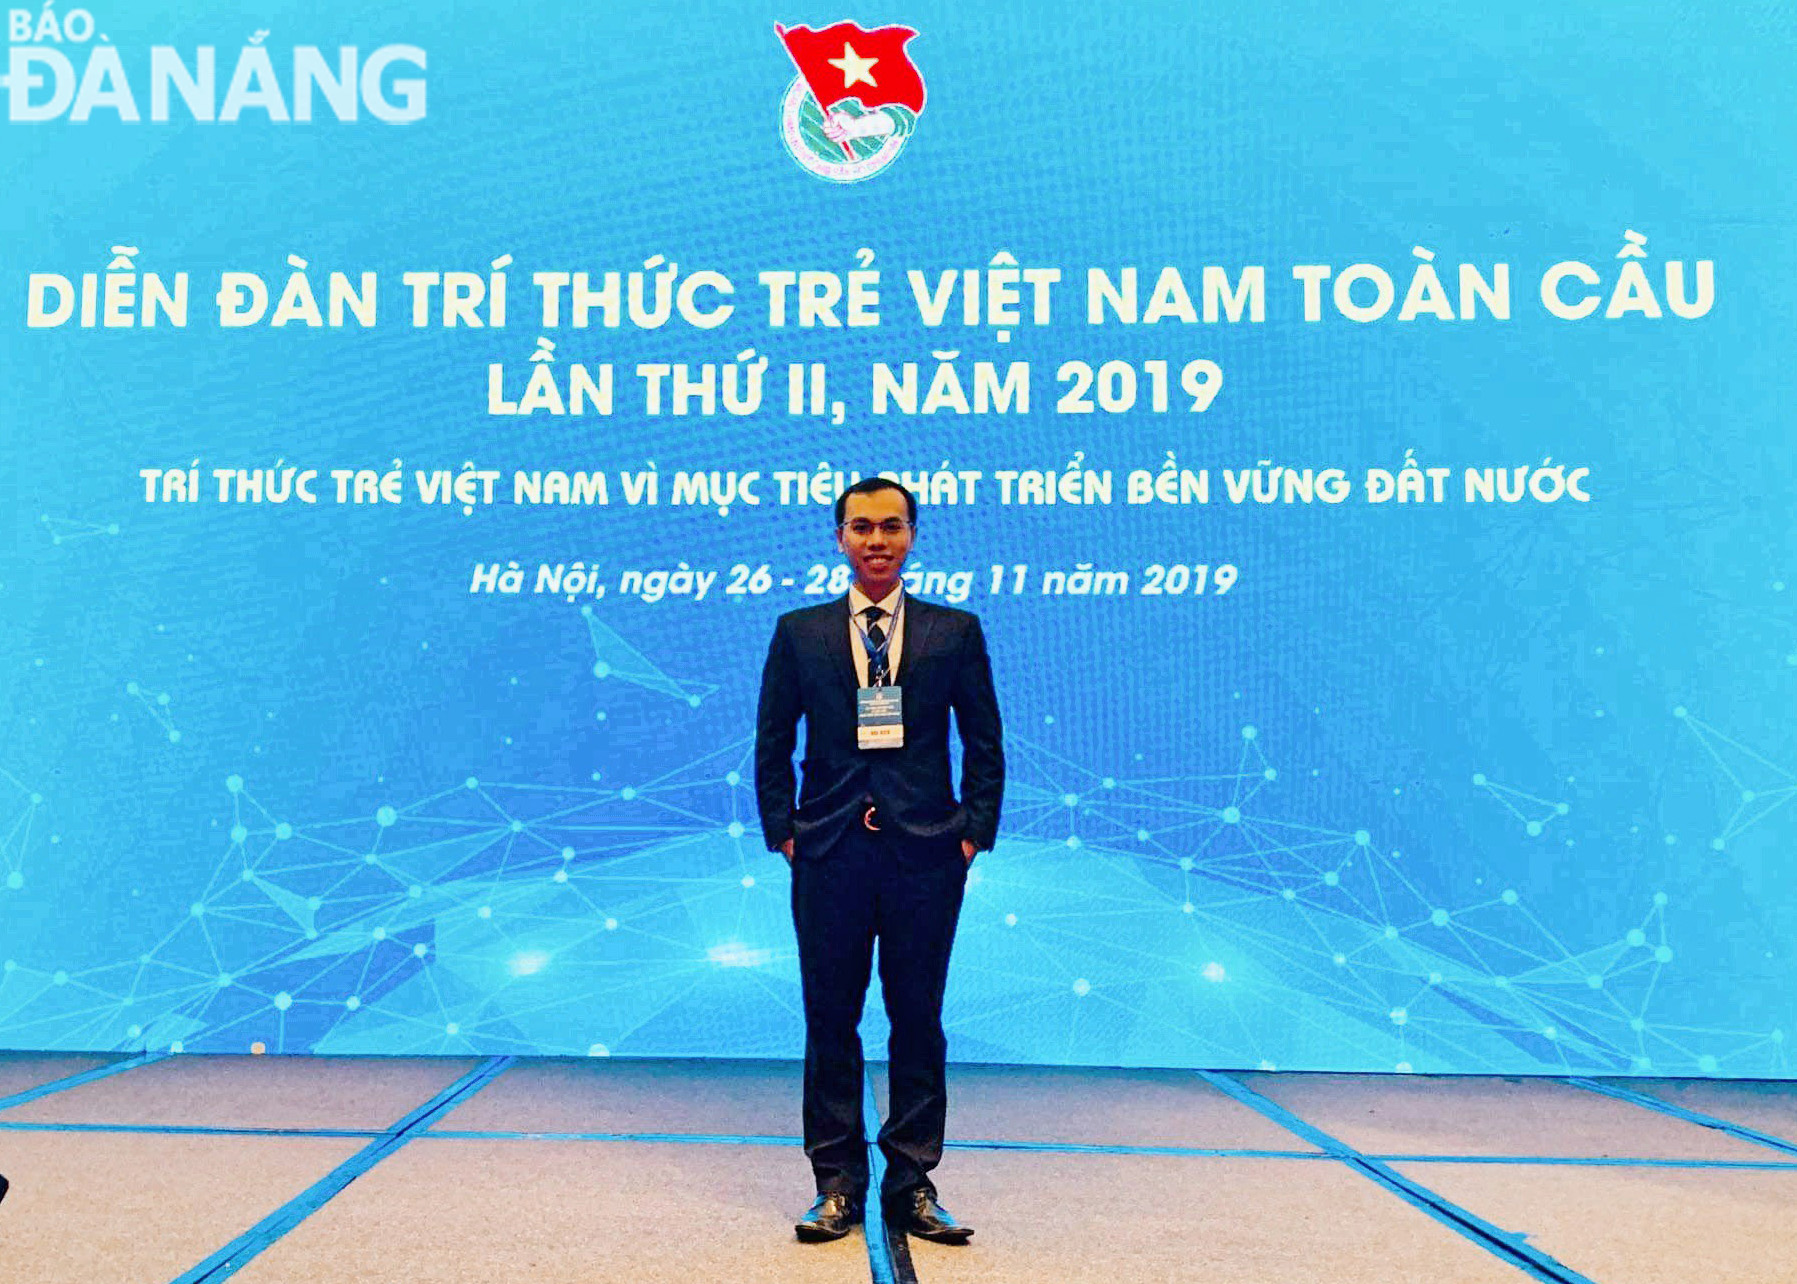 Le Anh Tien at the Global Young Vietnamese Intellectual Forum 2019